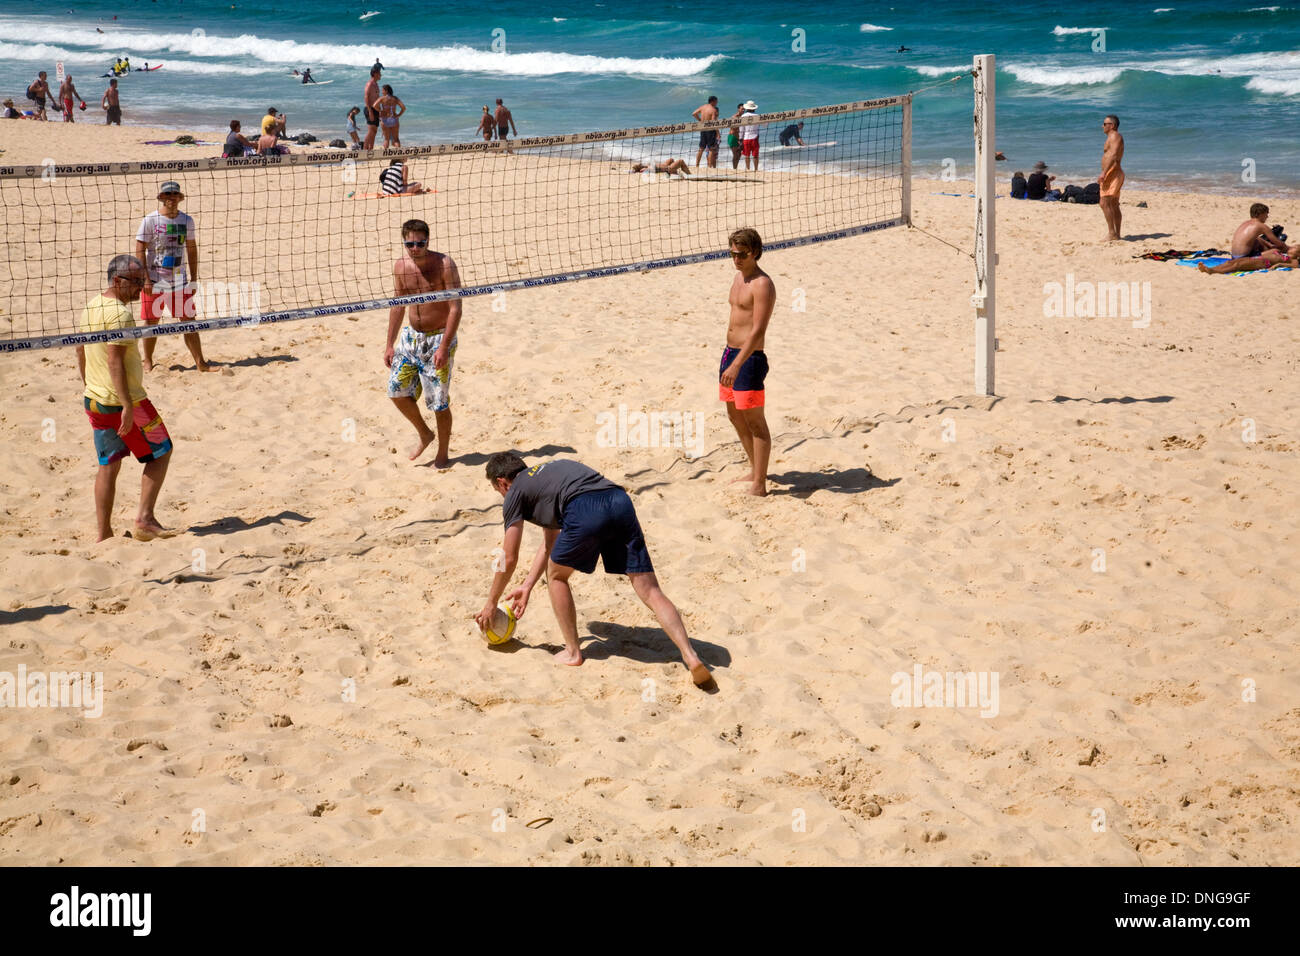 playing volleyball on Manly beach in sydney,australia Stock Photo